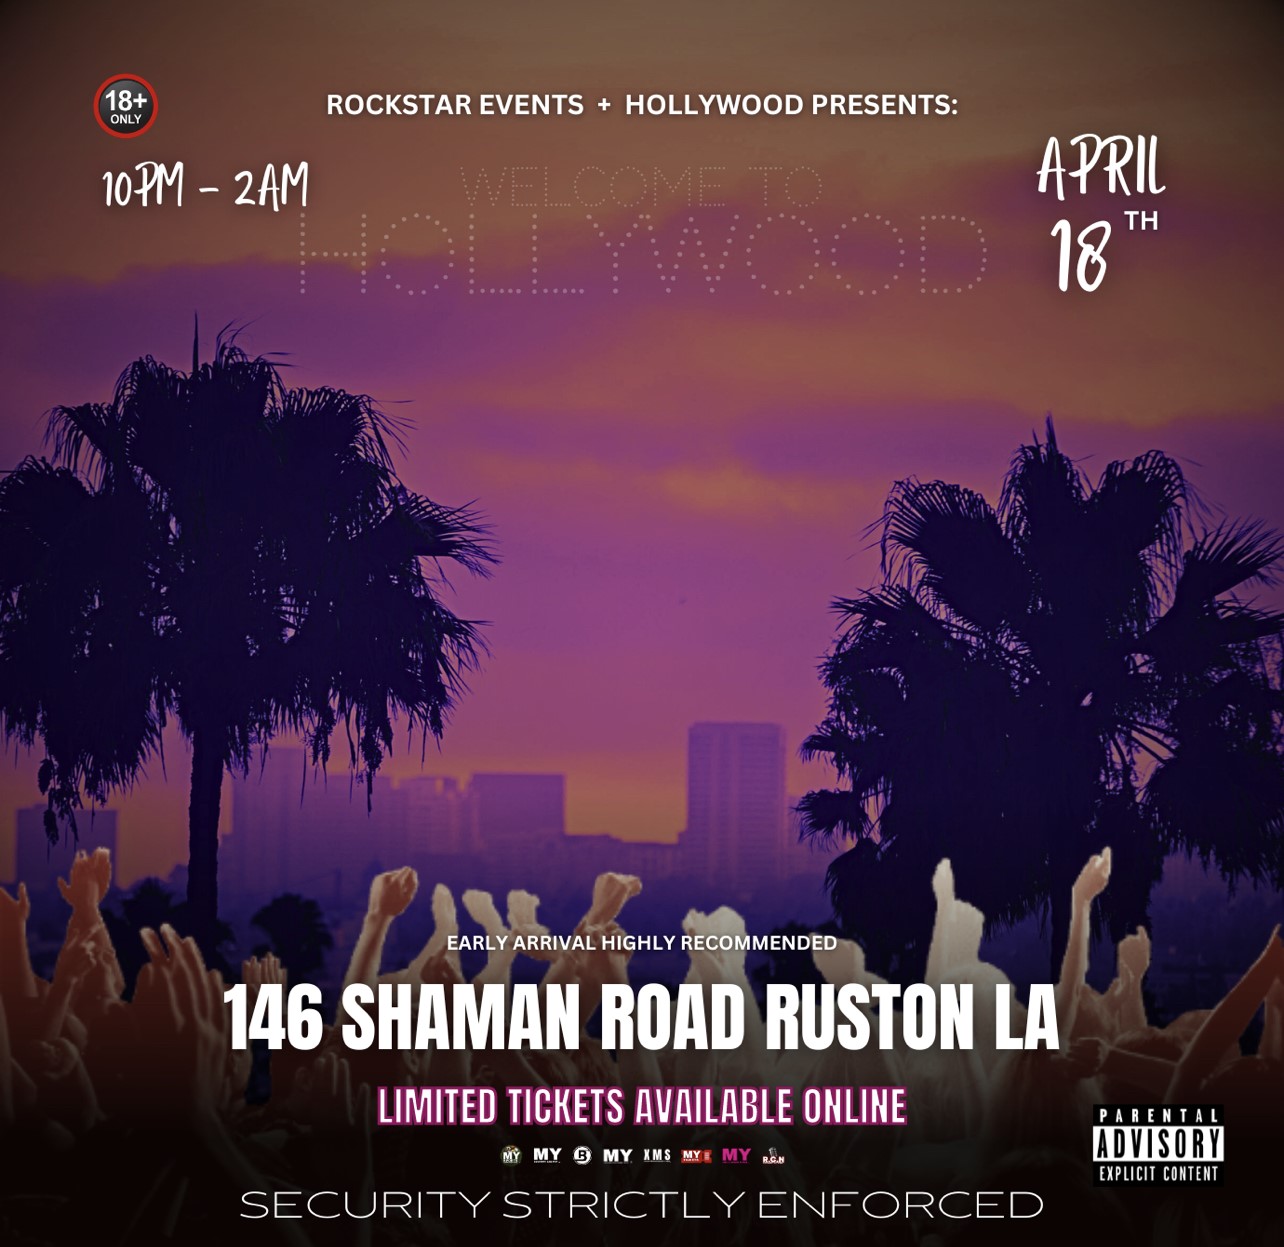 Concert Afterparty Grambling, Louisiana on Apr 18, 22:00@THE HOLLYWOOD HANGOUT (SHAMAN ROAD) - Buy tickets and Get information on MY TICKETS™ shopmytickets.com